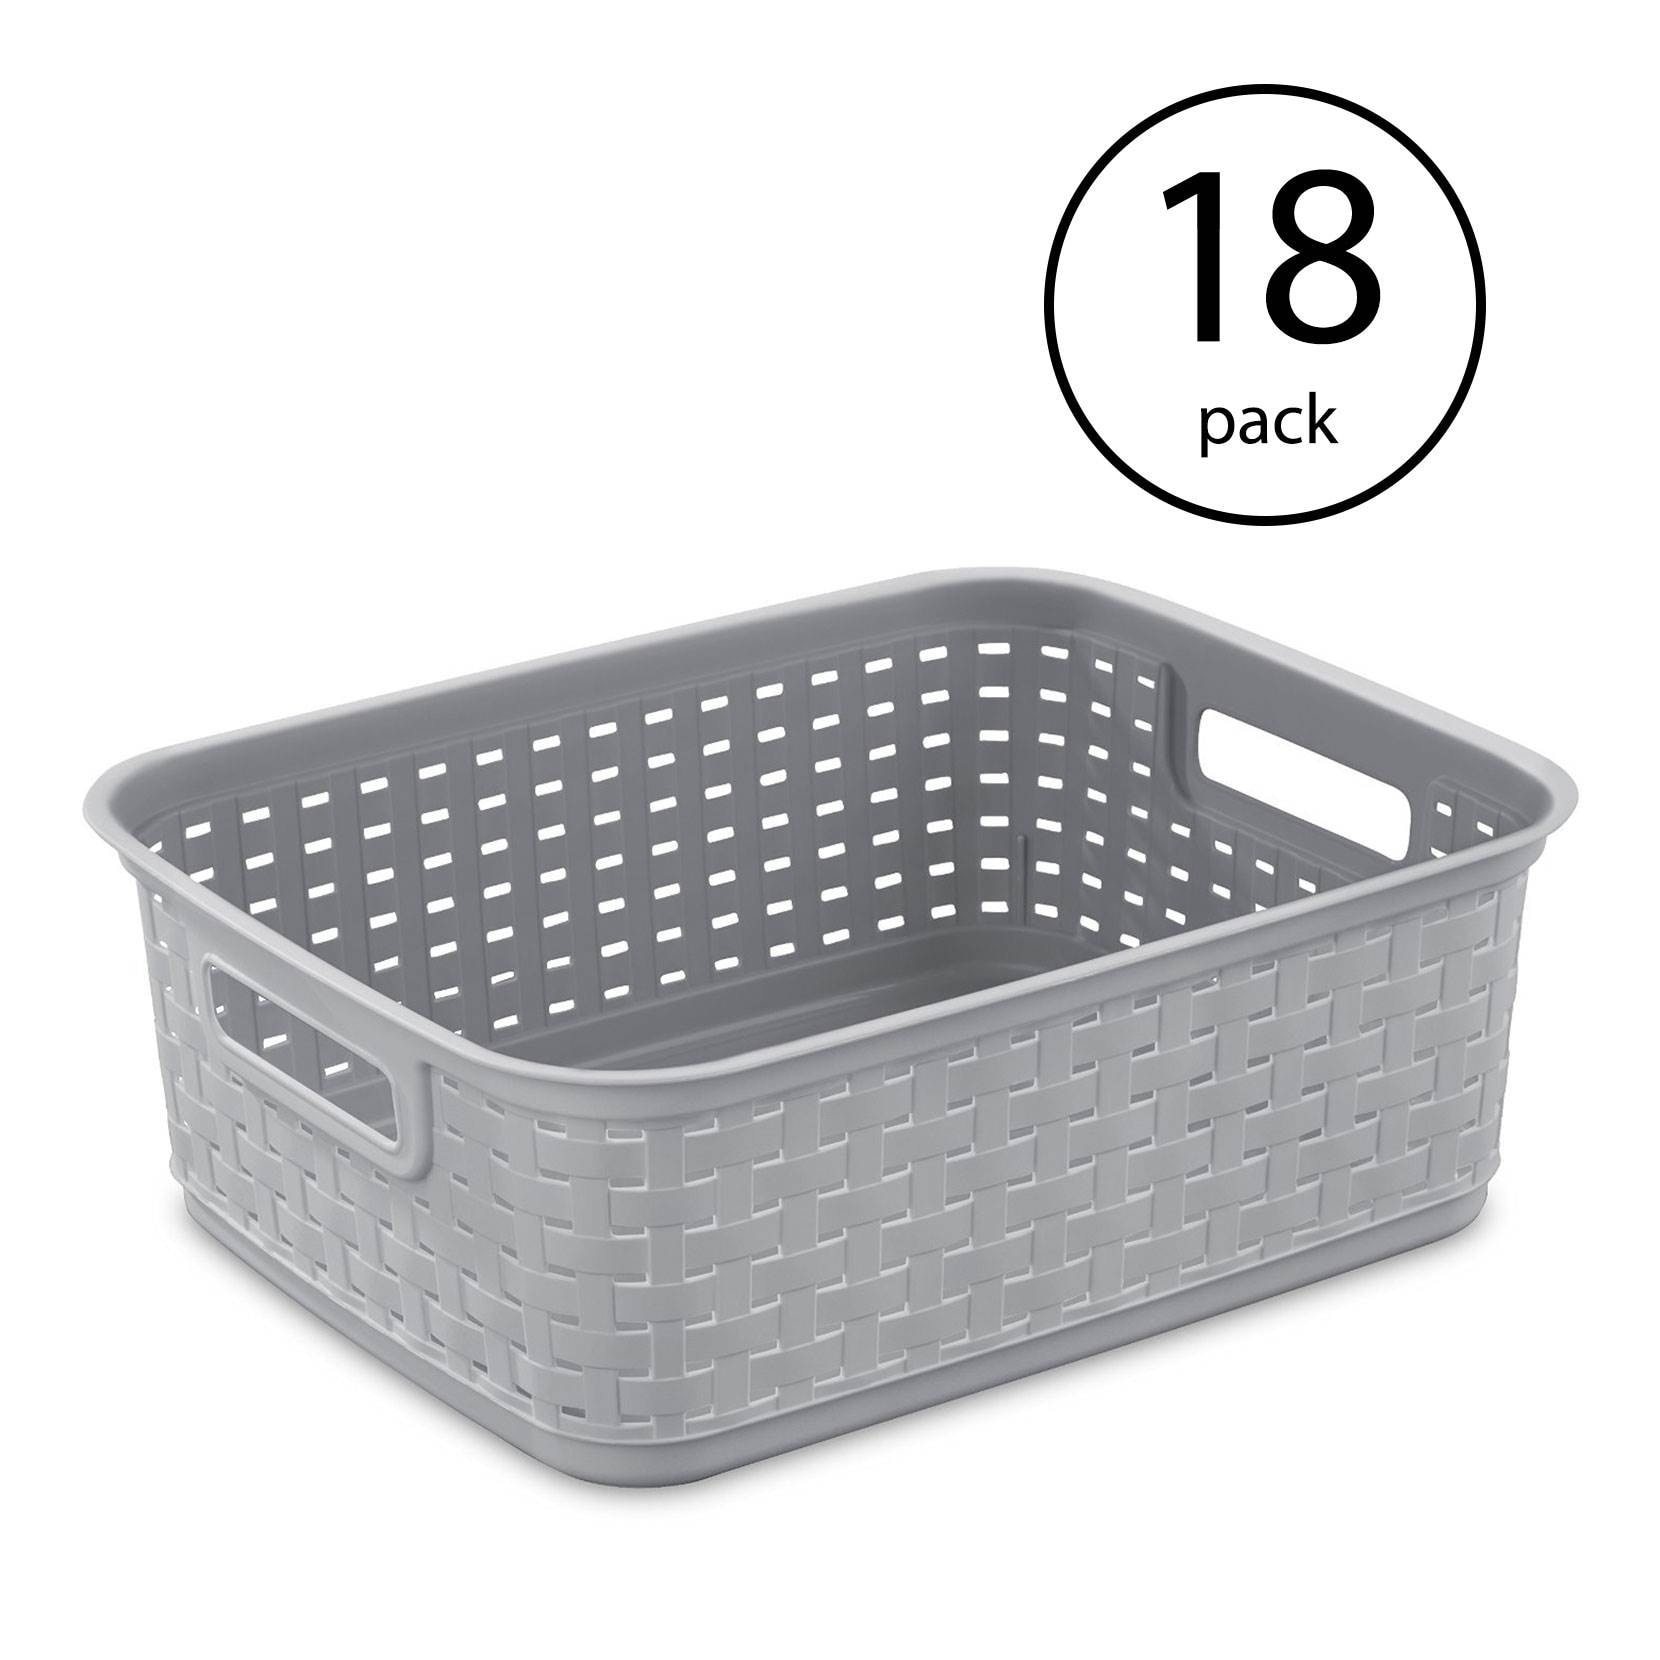 https://ak1.ostkcdn.com/images/products/is/images/direct/326a17a19fb0fba43cde5ddeada52c9cd9a33fb9/Sterilite-Short-Weave-Wicker-Pattern-Storage-Container-Basket%2C-Gray-%2818-Pack%29.jpg